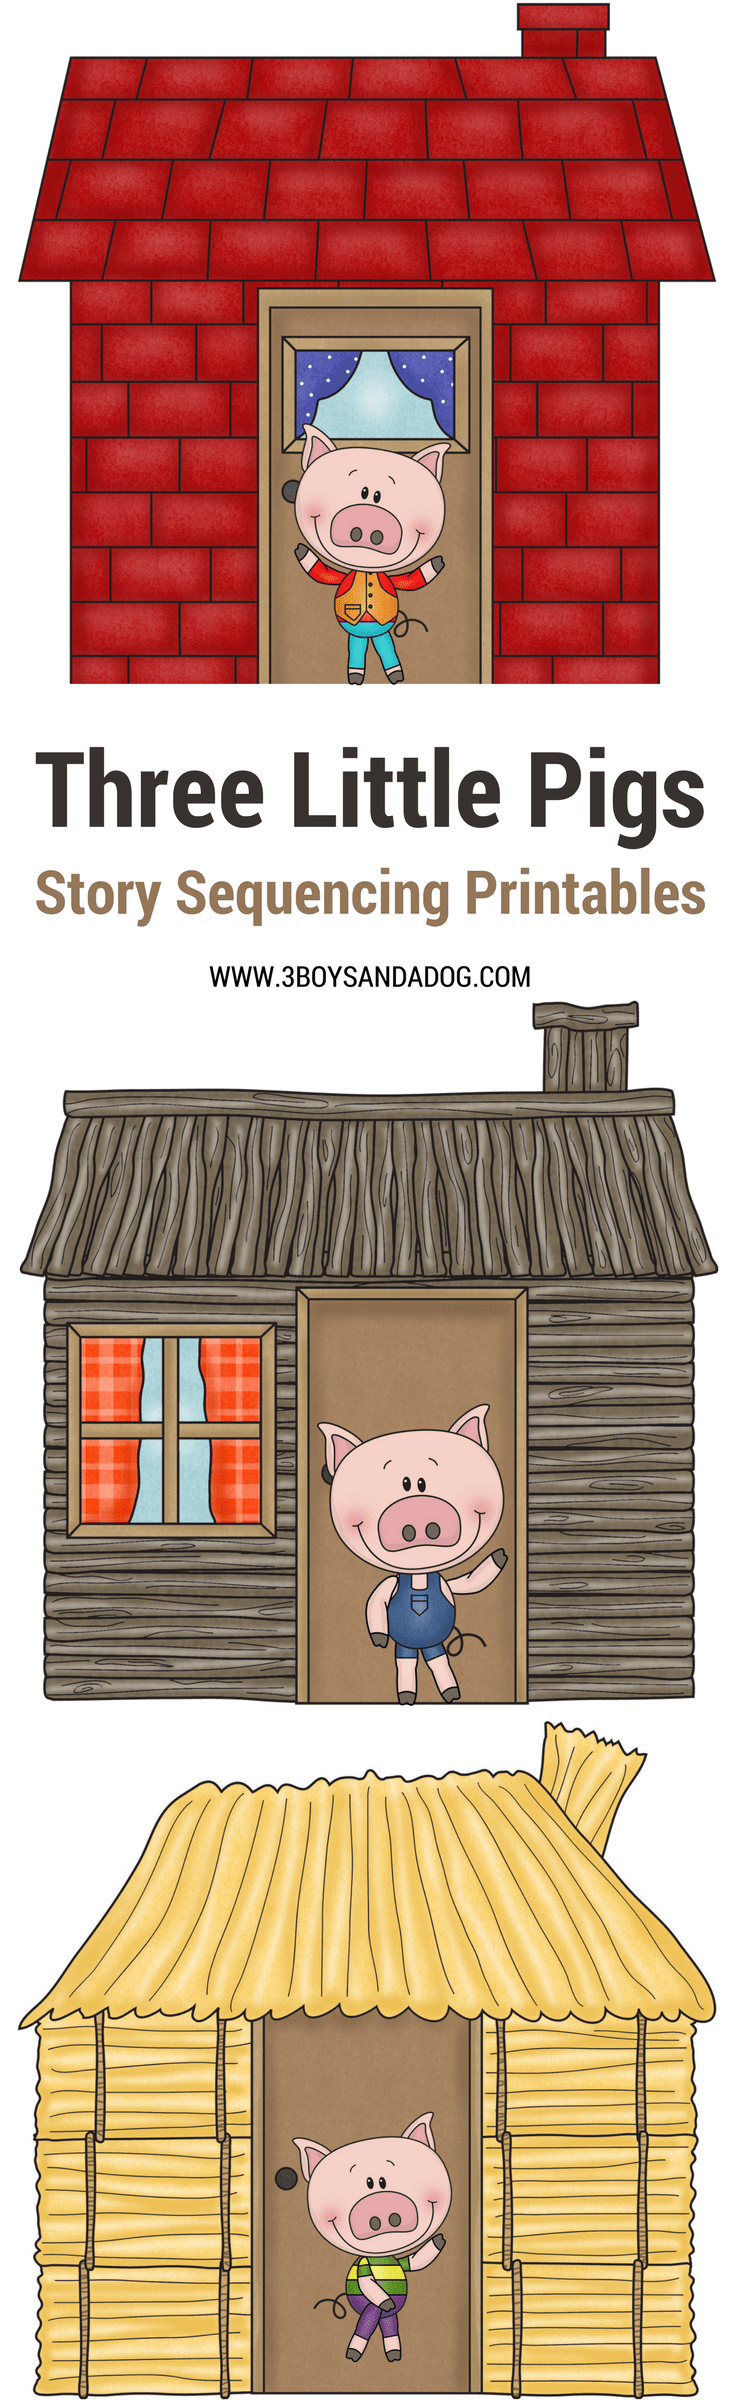 These 3 Little Pigs Pictures to Sequence are fun and educational. Paired with the classic 3 Little Pigs Story, these free printables will help your preschooler understand sequencing.